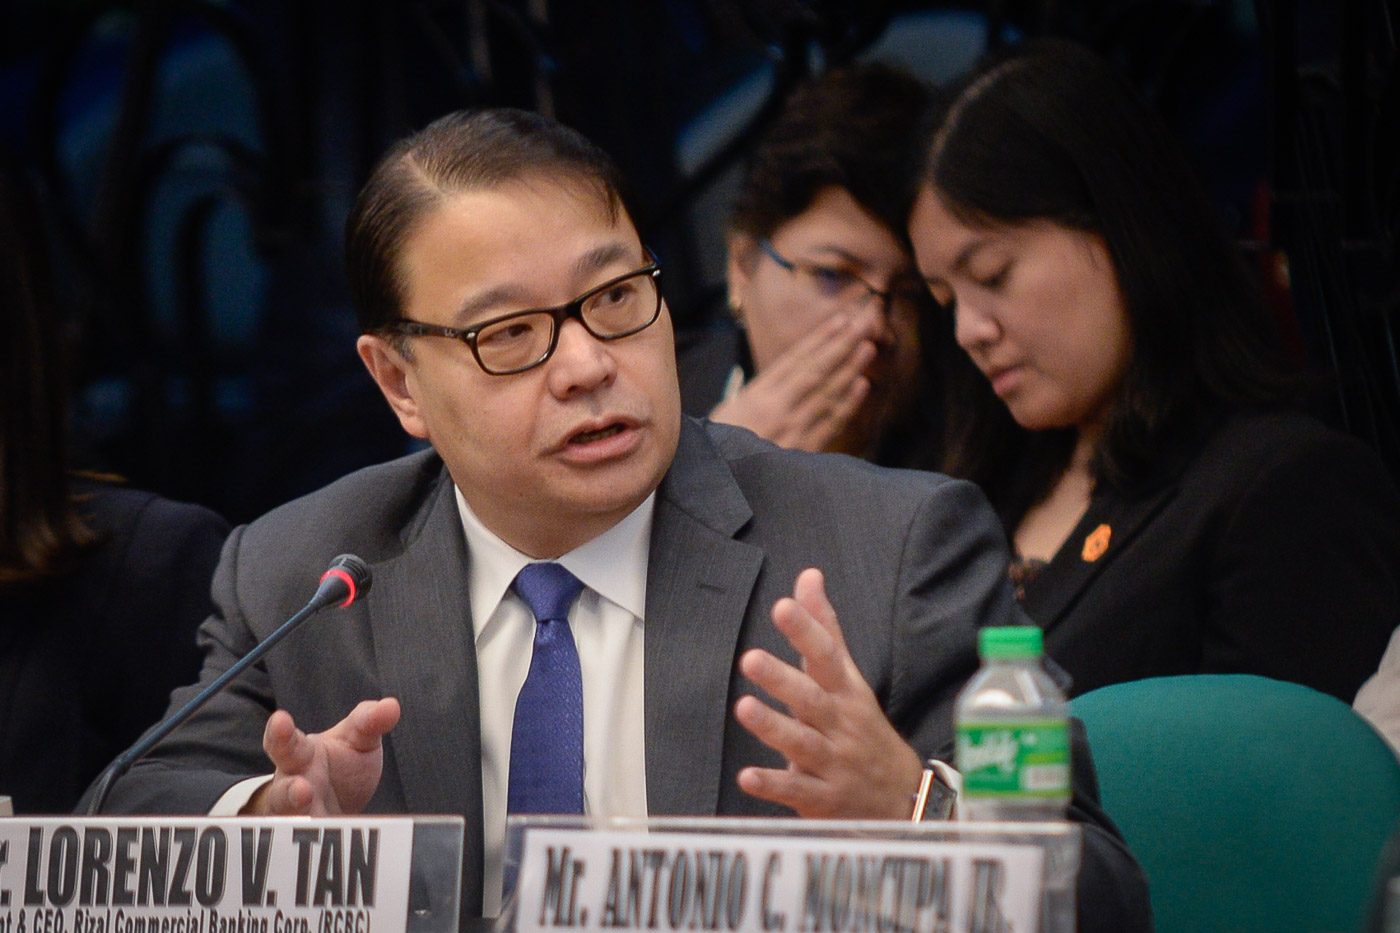 Not the first controversy for RCBC ‘miracle man’ Lorenzo V. Tan